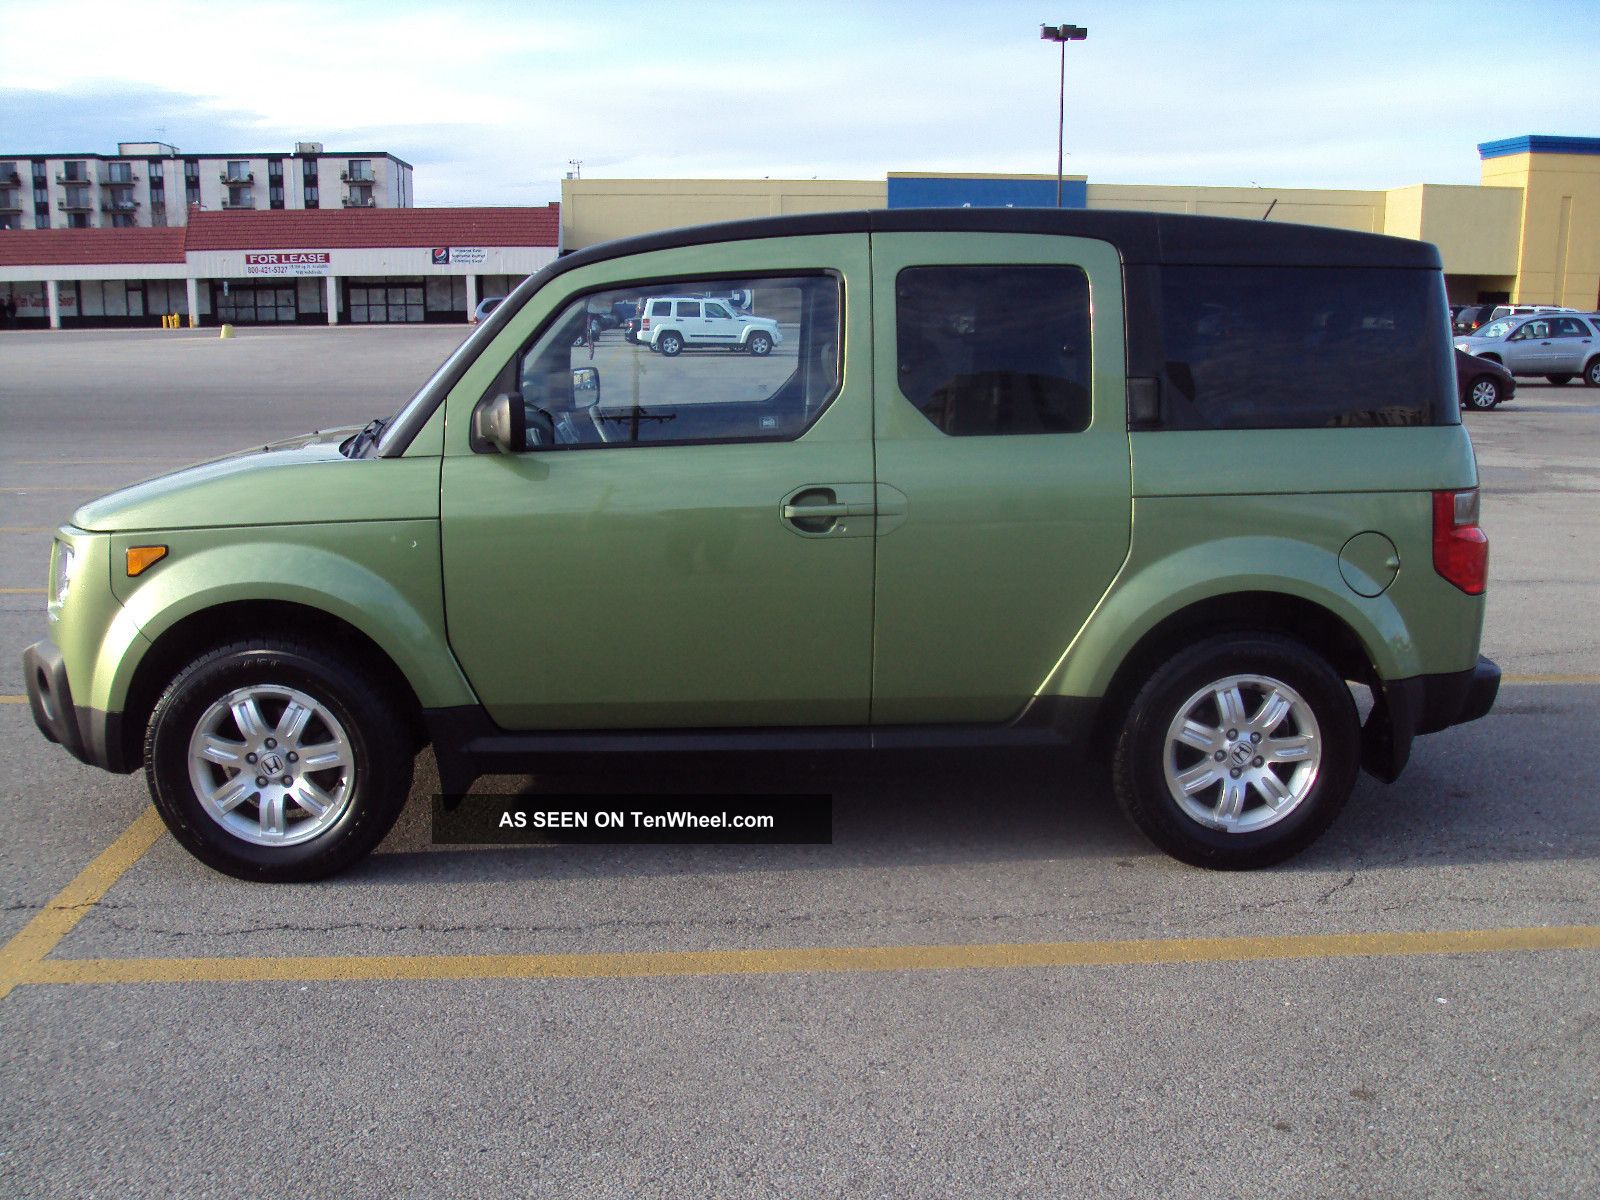 Does 2006 honda element have side airbags